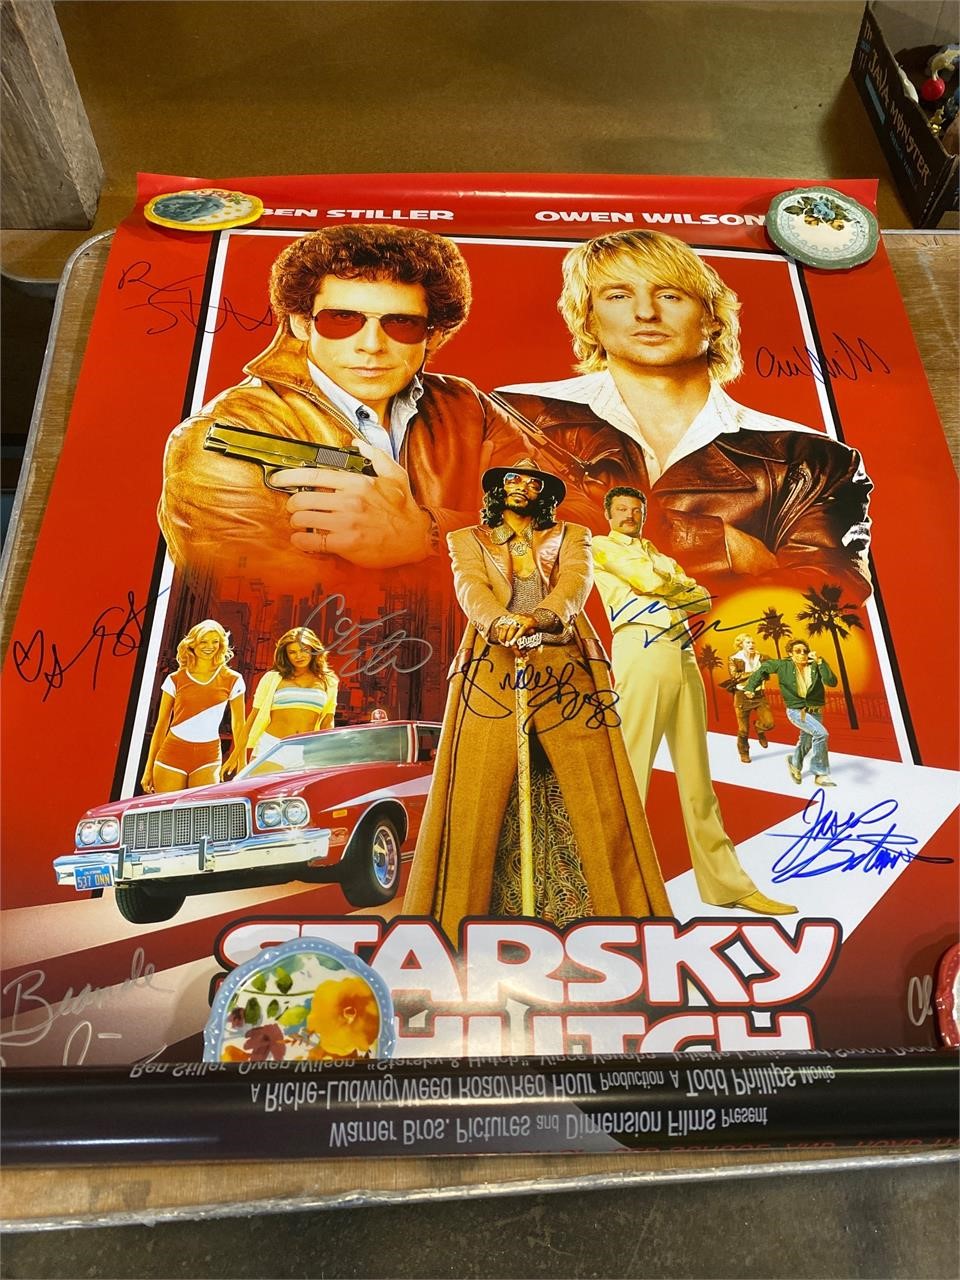 Star sky & Hutch autographed poster, 28 x 36”